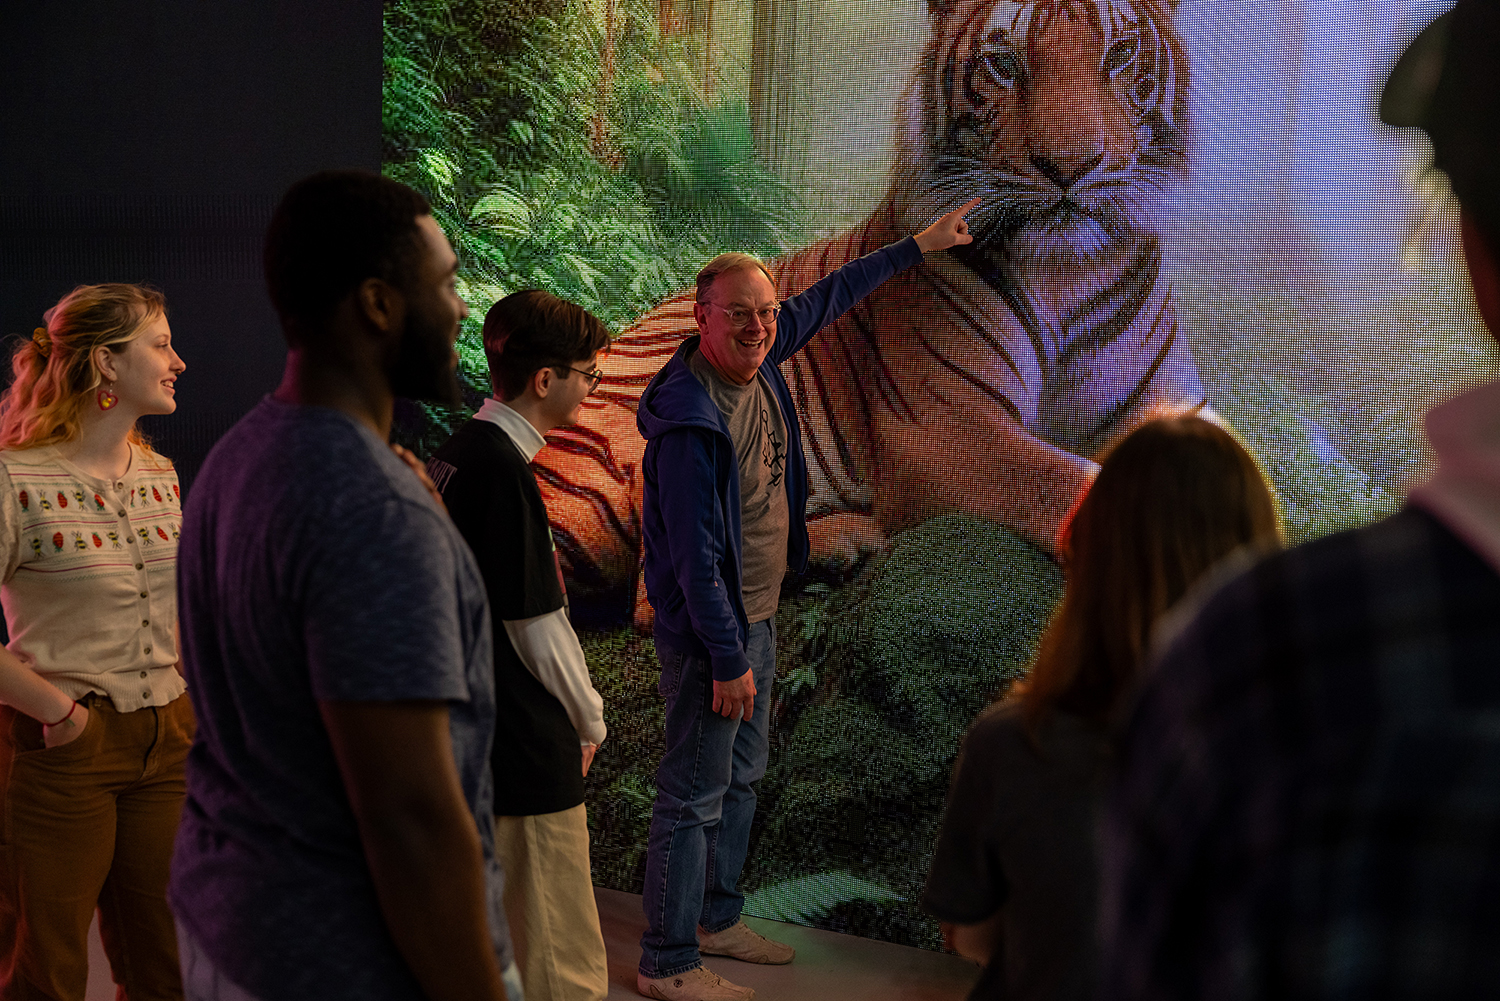 Flip Phillips points to a CGI tiger on a large LED screen.